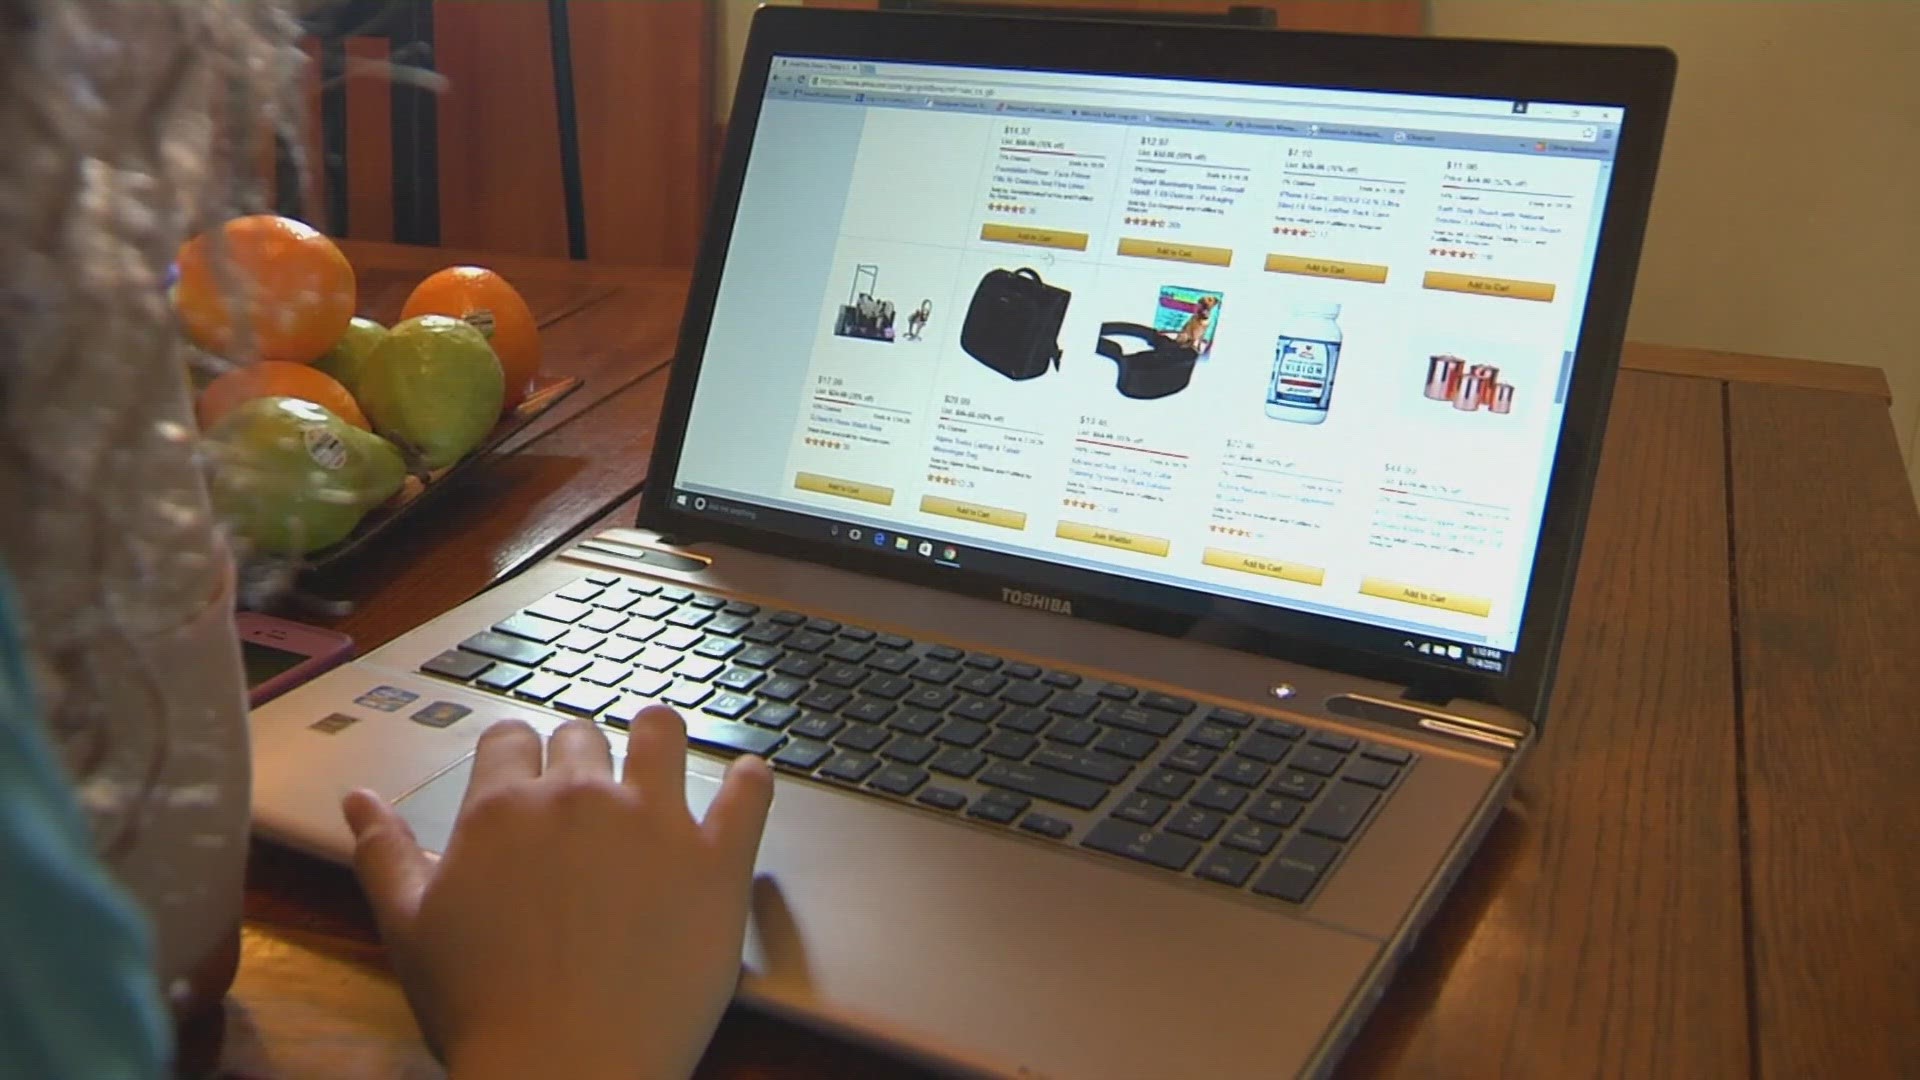 The Better Business Bureau Great West + Pacific said falling for fake online product reviews and ratings often leads consumers to buy poor-quality products.